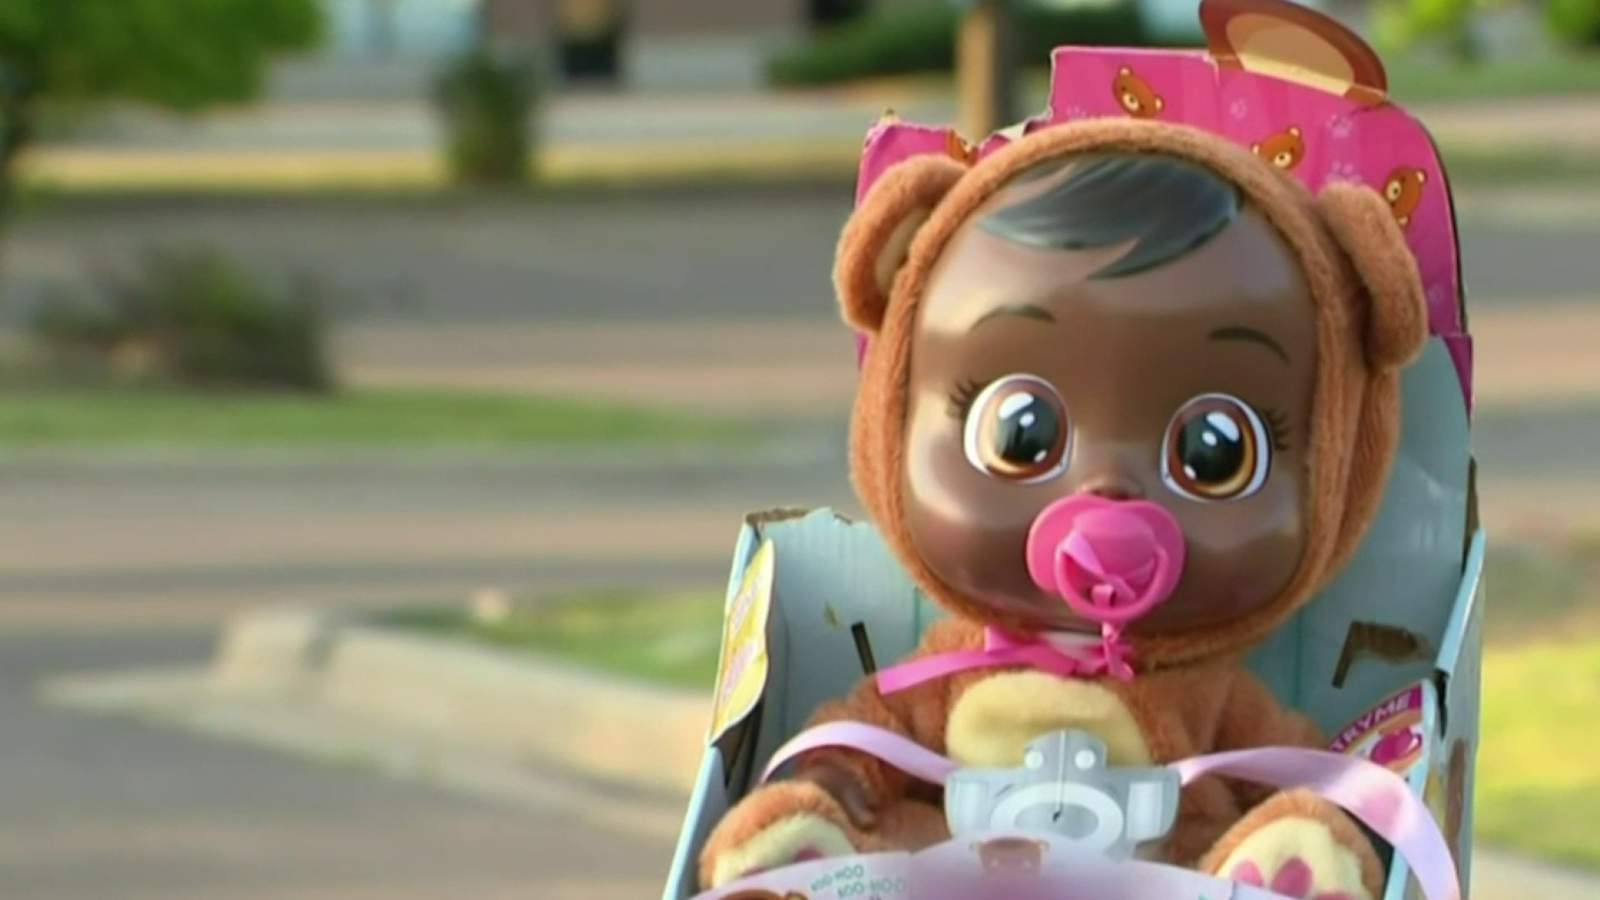 Taylor woman says racial slur was written on toy shipped by Amazon